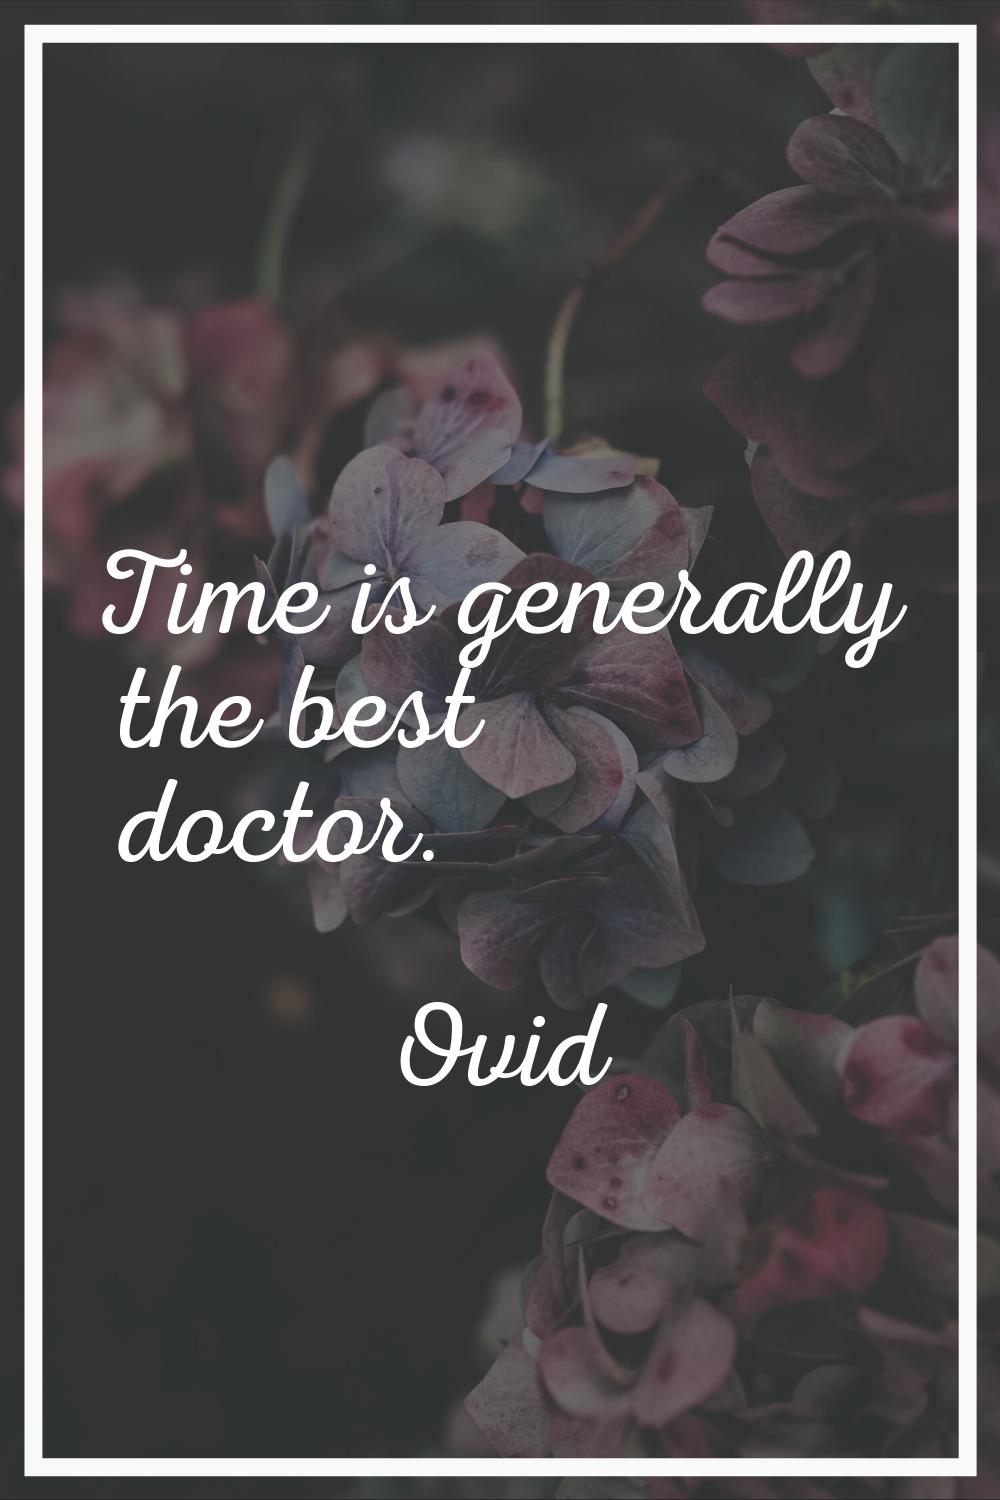 Time is generally the best doctor.